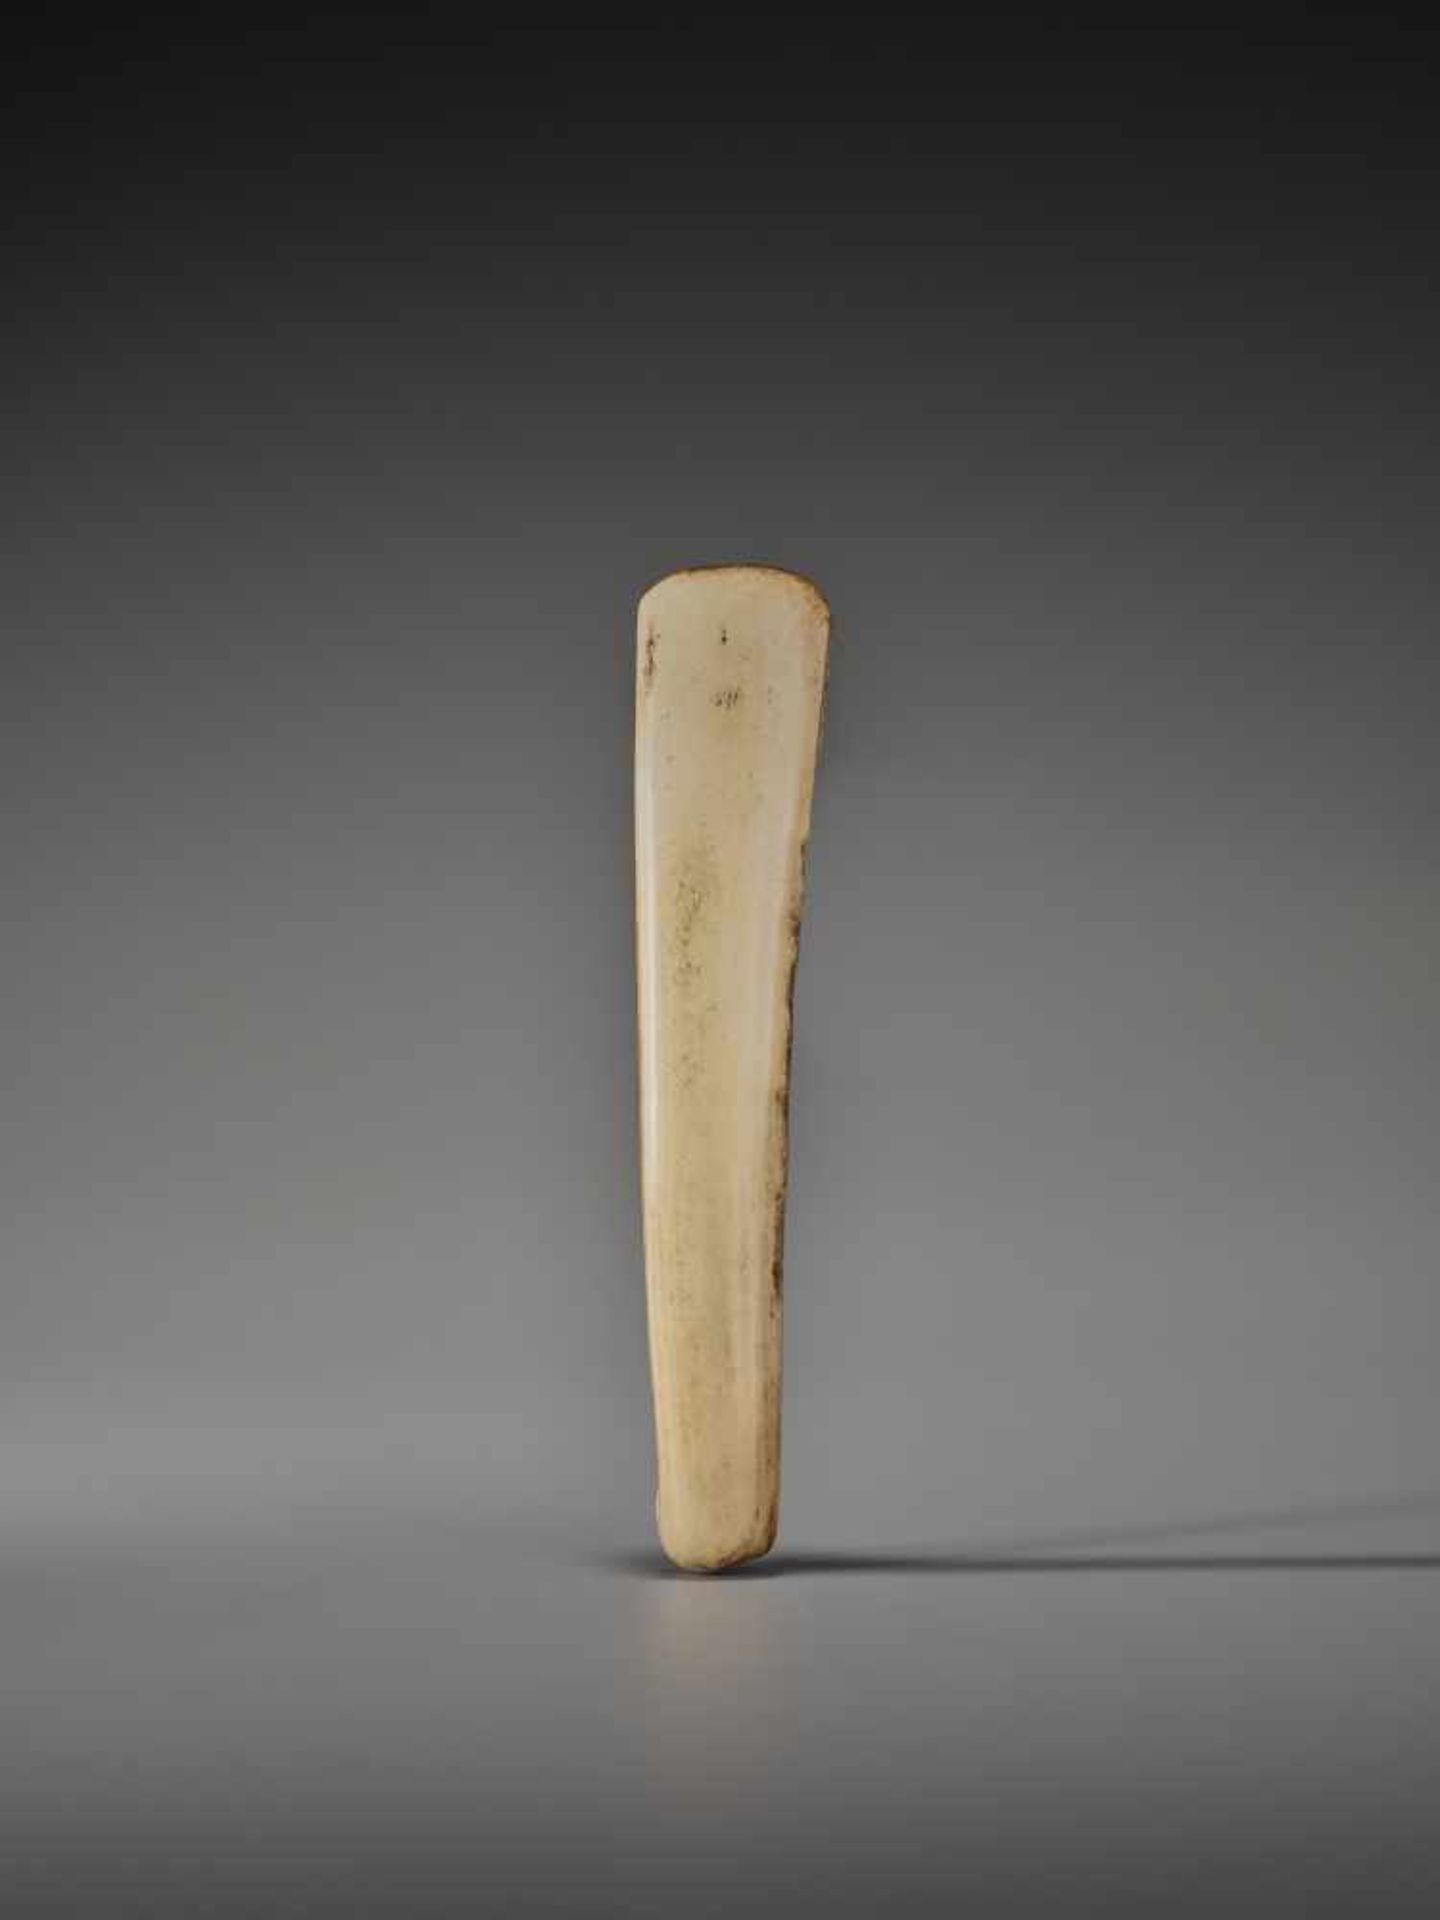 A STAG ANTLER OBI HASAMI NETSUKEUnsigned, stag antler obi hasami netsukeJapan, 19th century, Edo - Bild 3 aus 3